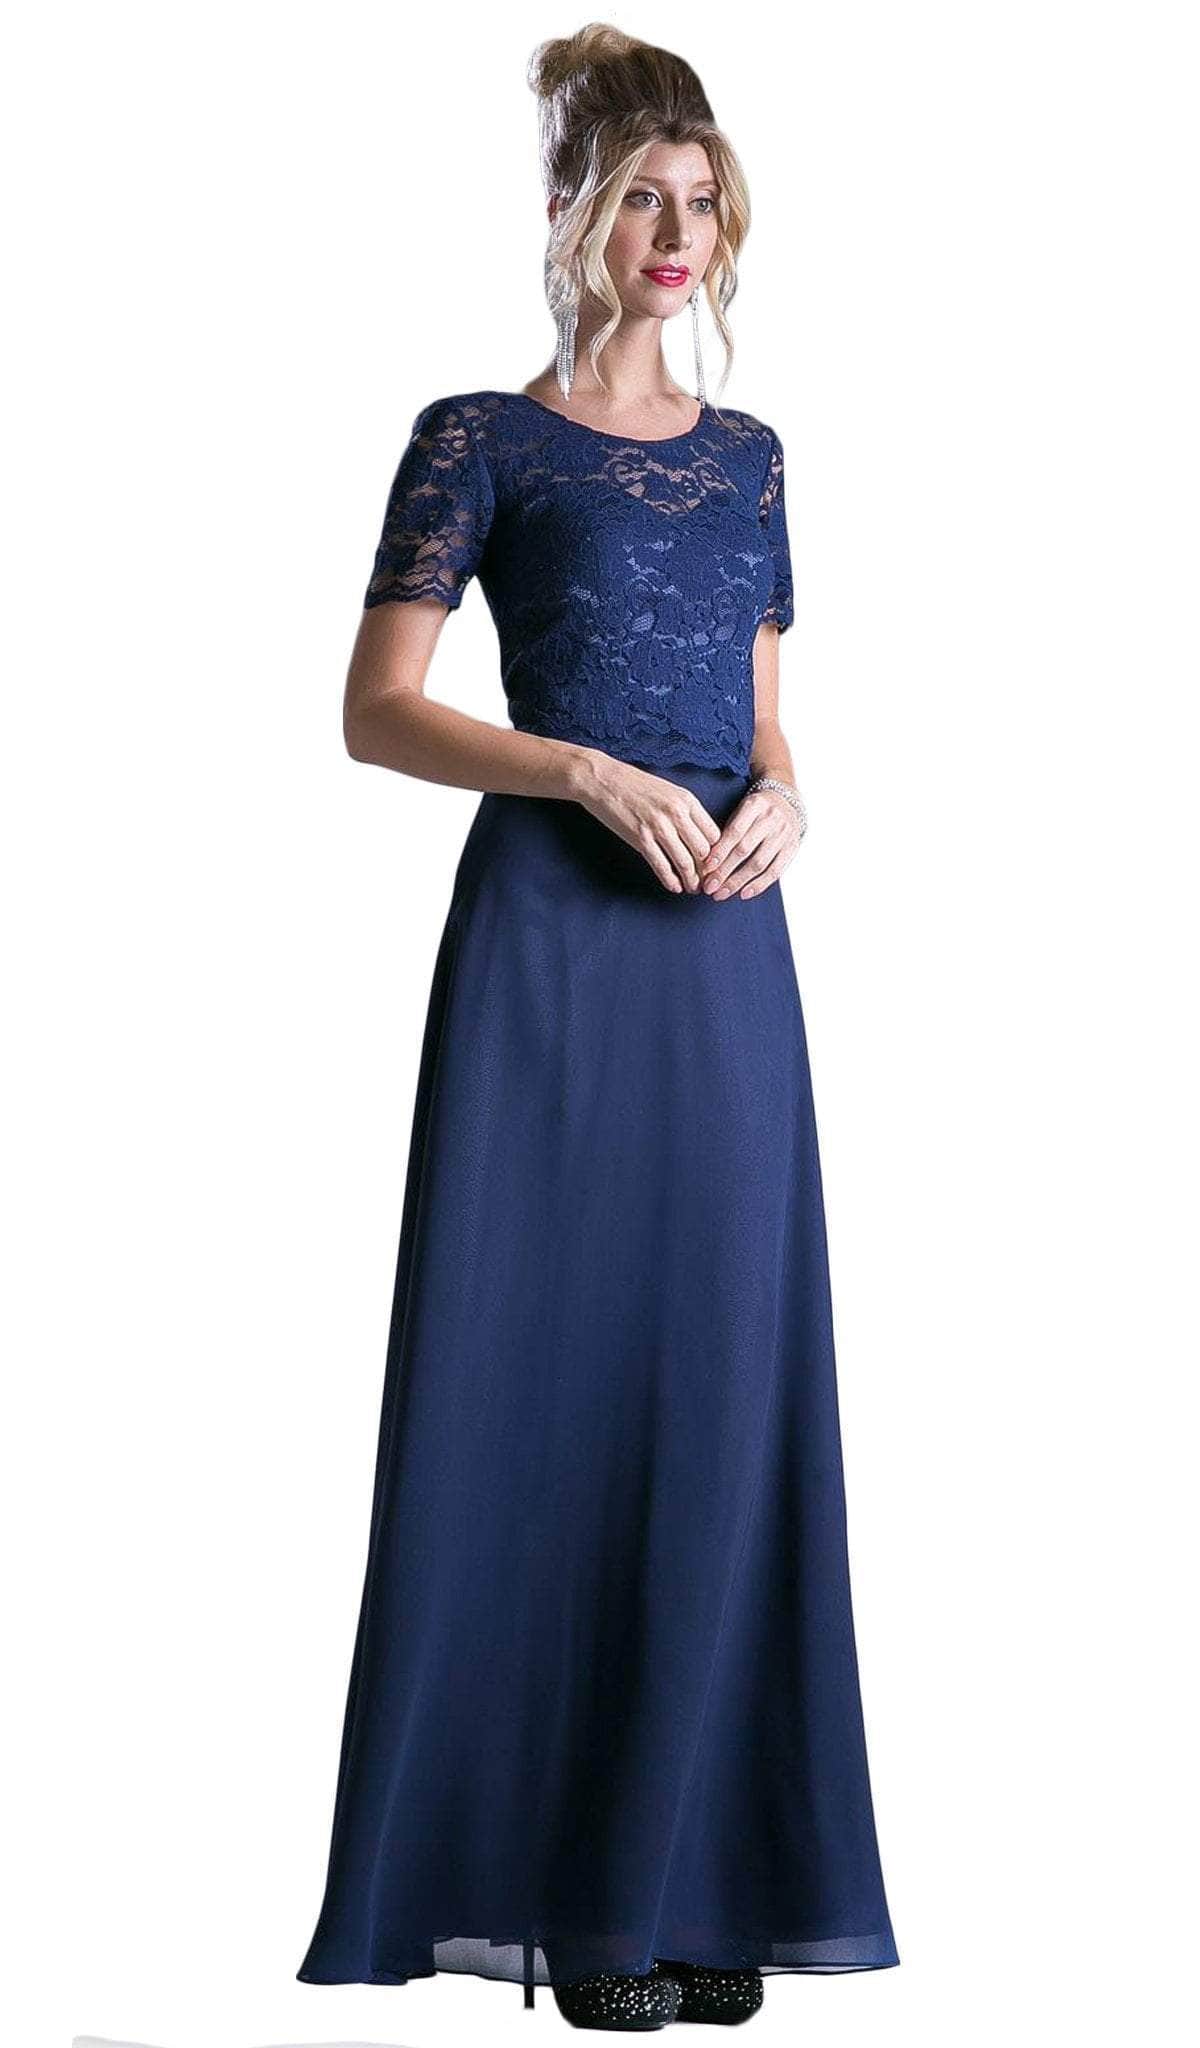 Image of Ladivine CF160 - Lace Bodice Mock Two-Piece Dress